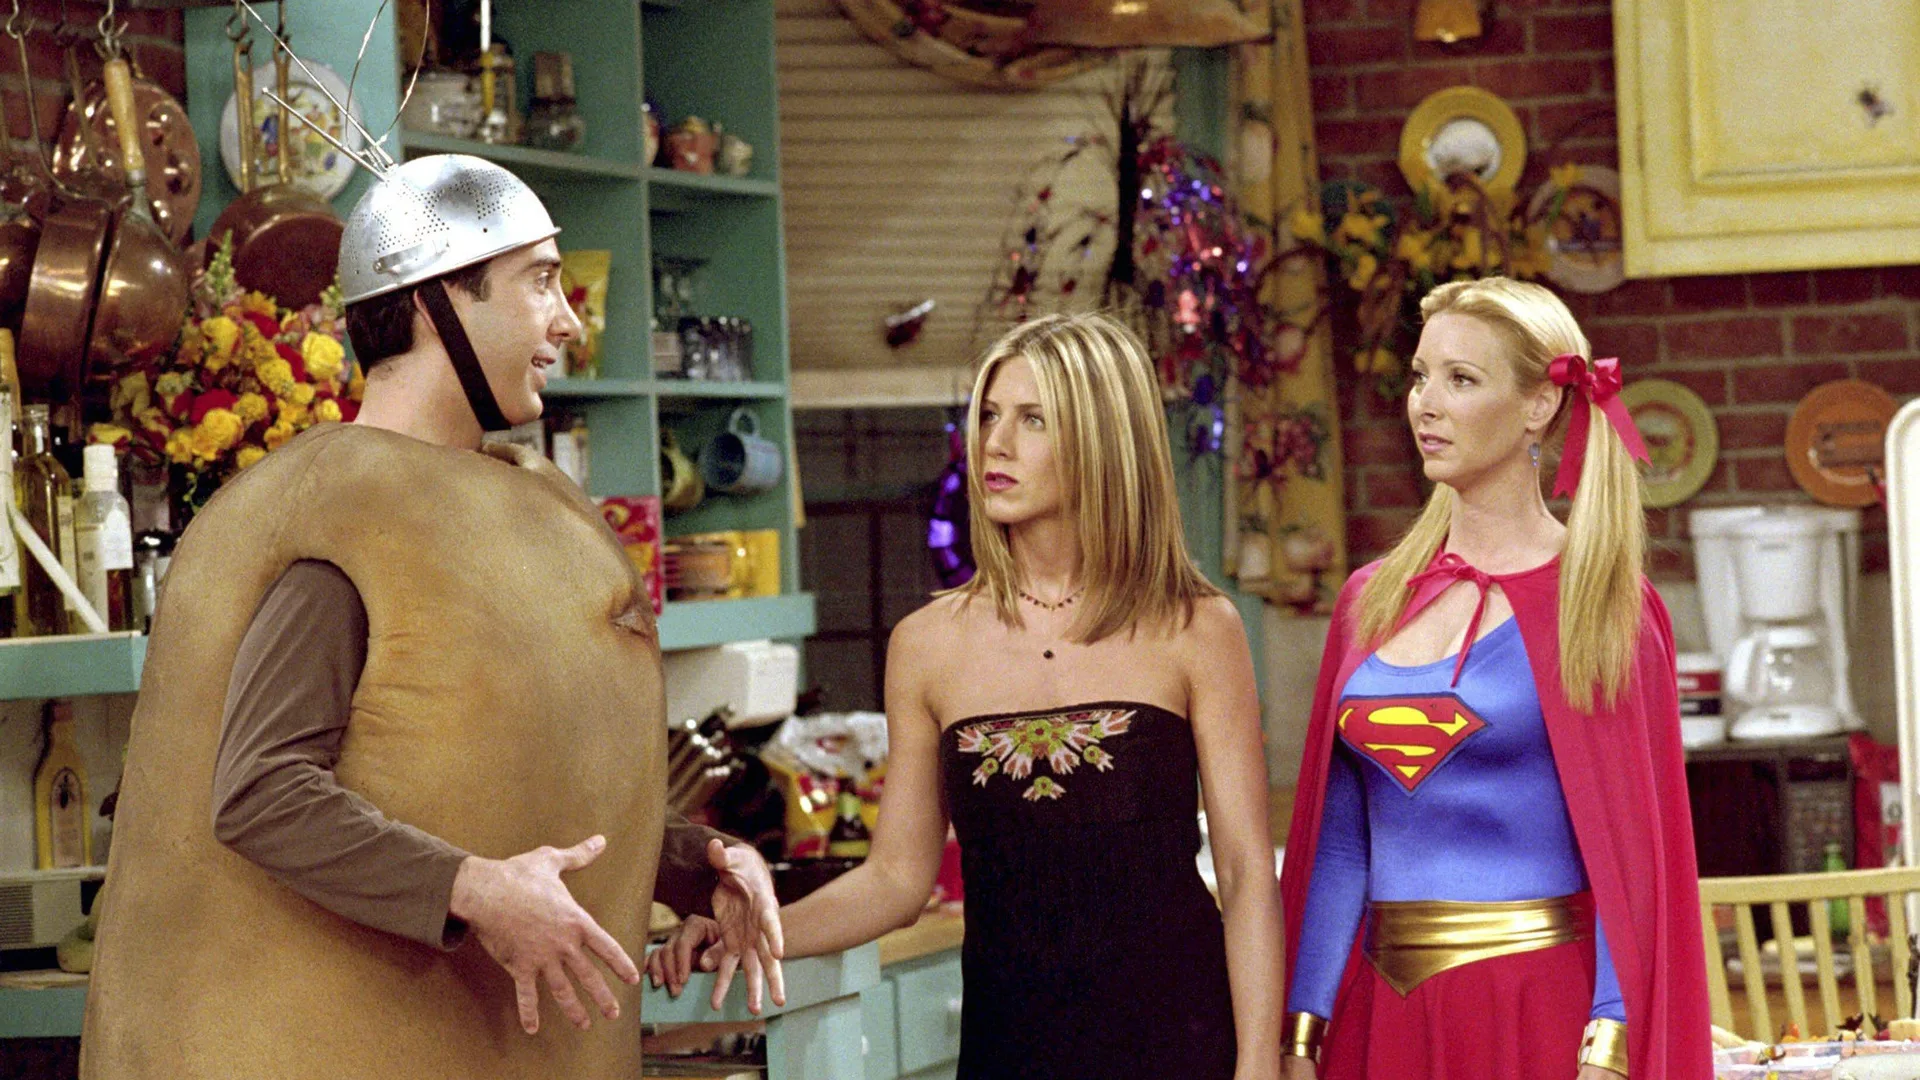 A photograph of the cast of Friends - Ross, Rachel and Phoebe in Halloween costume. Ross is dressed like a potato with a silver colander on his head, Rachel is in a black dress and Phoebe is dressed as Superwoman. They are stood in a kitchen.